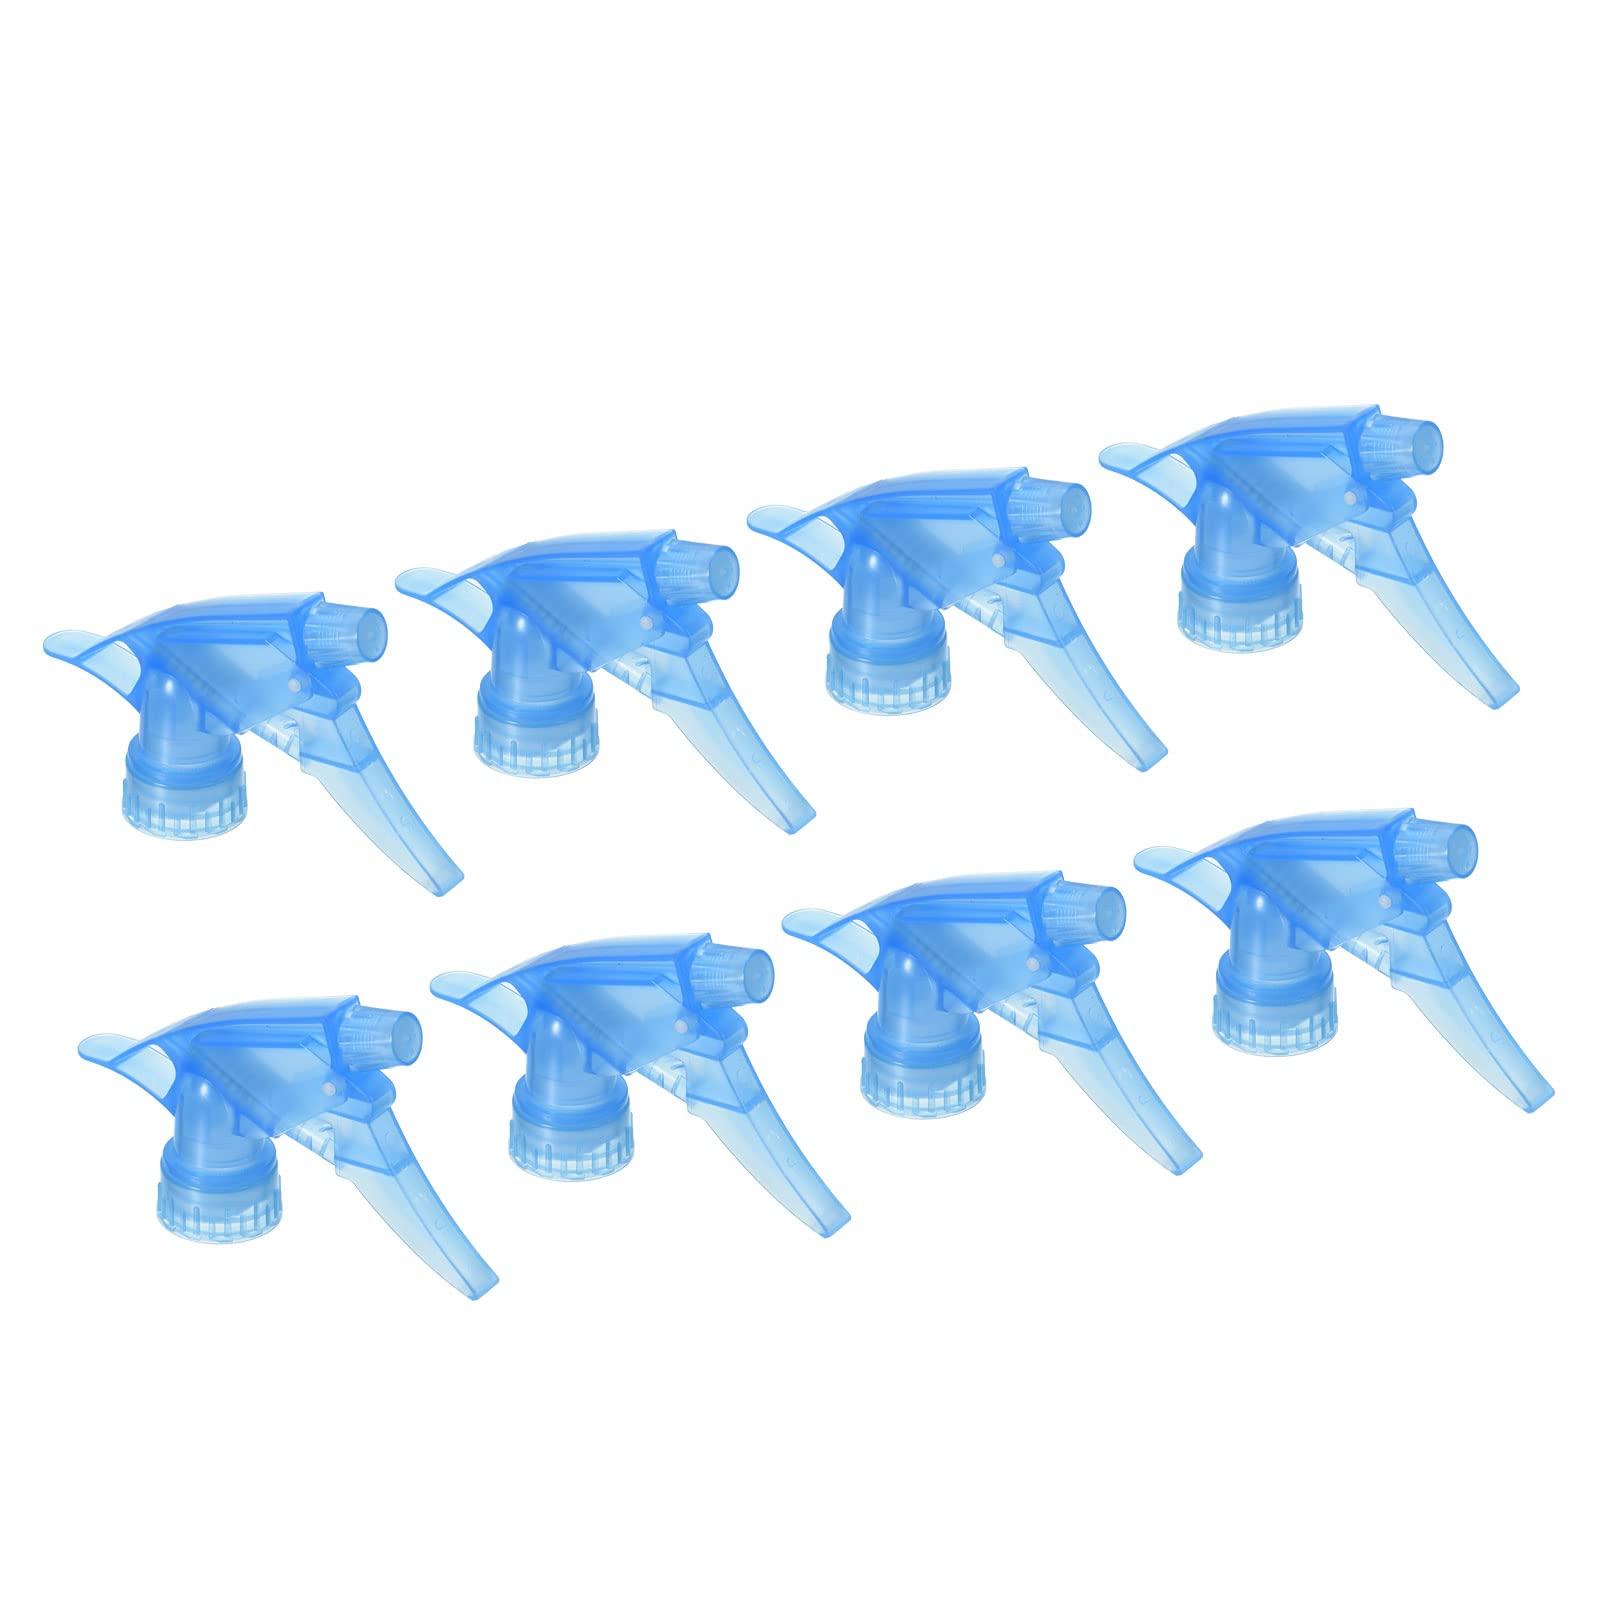 sourcing map Plastic Spray Bottle Nozzles Adjustable Water Sprayer Spraying Bottle Replacement Part Fit 2.5cm Bottles for Cleaning Watering (Blue, Pack of 8)